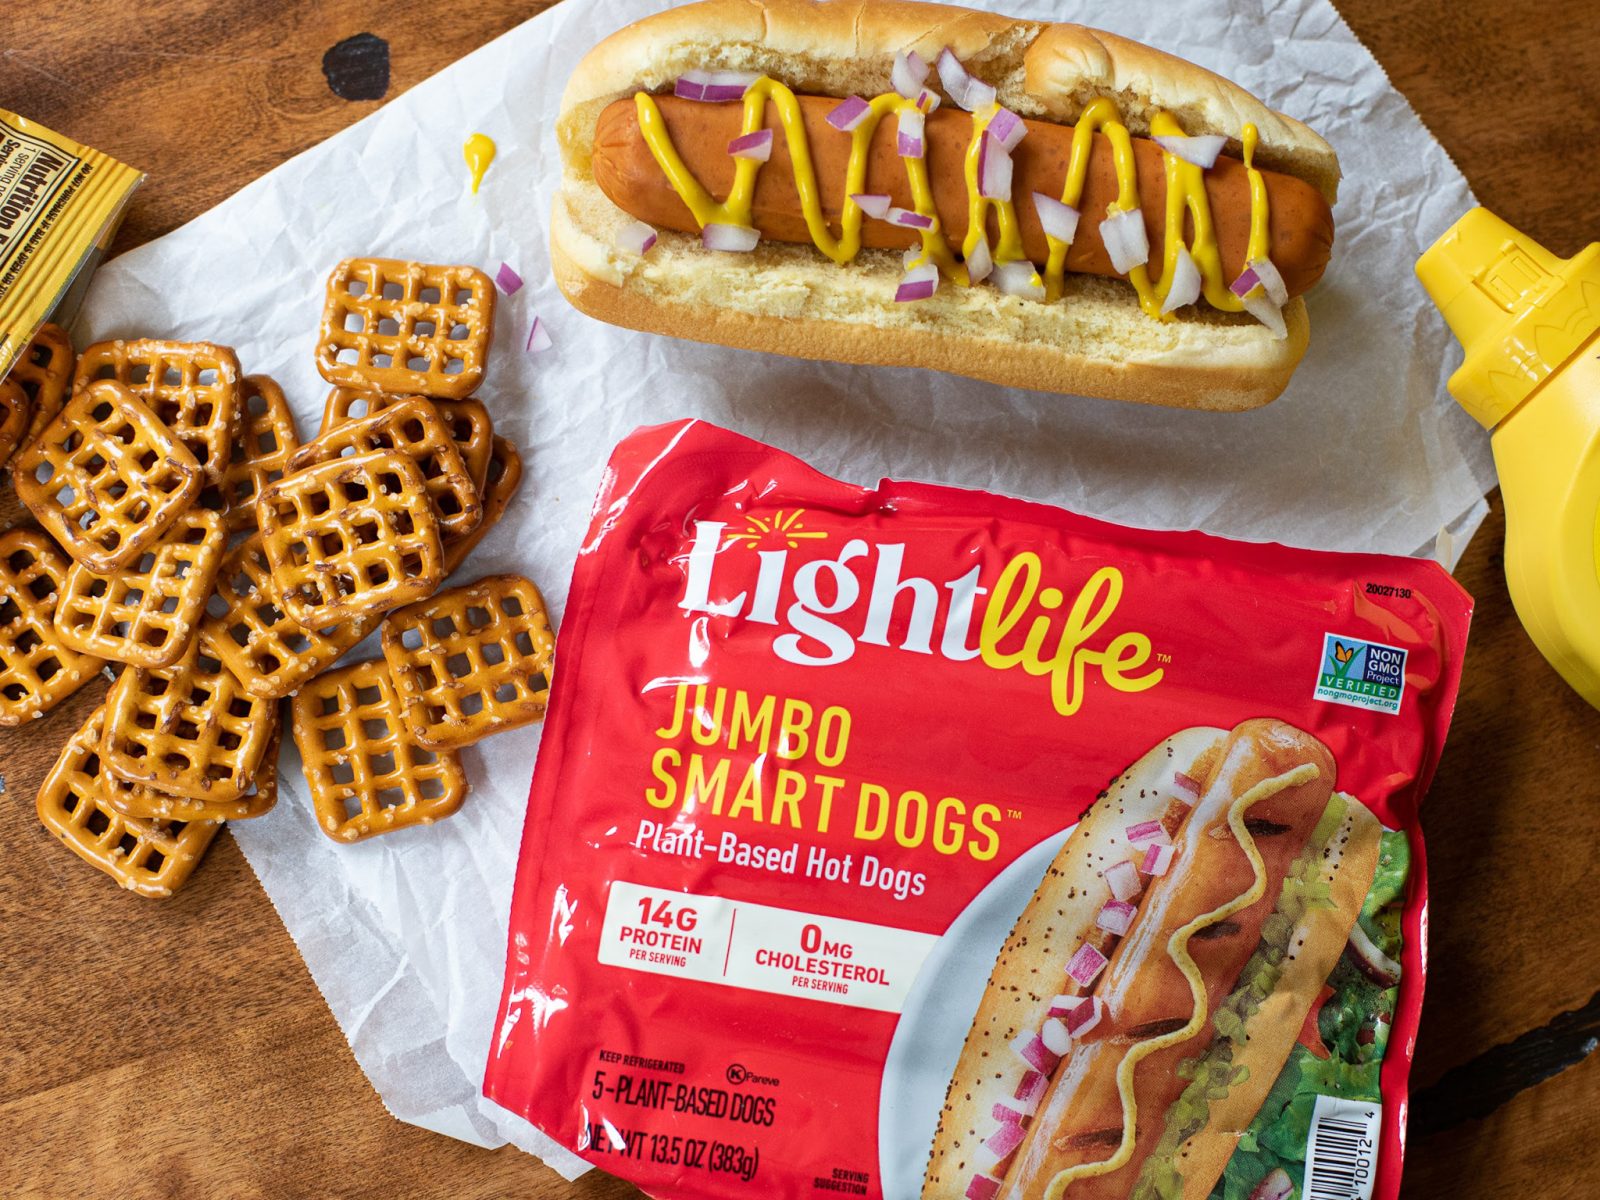 Lightlife Smart Dogs Plant Based Hot Dogs As Low As $1.49 At Kroger